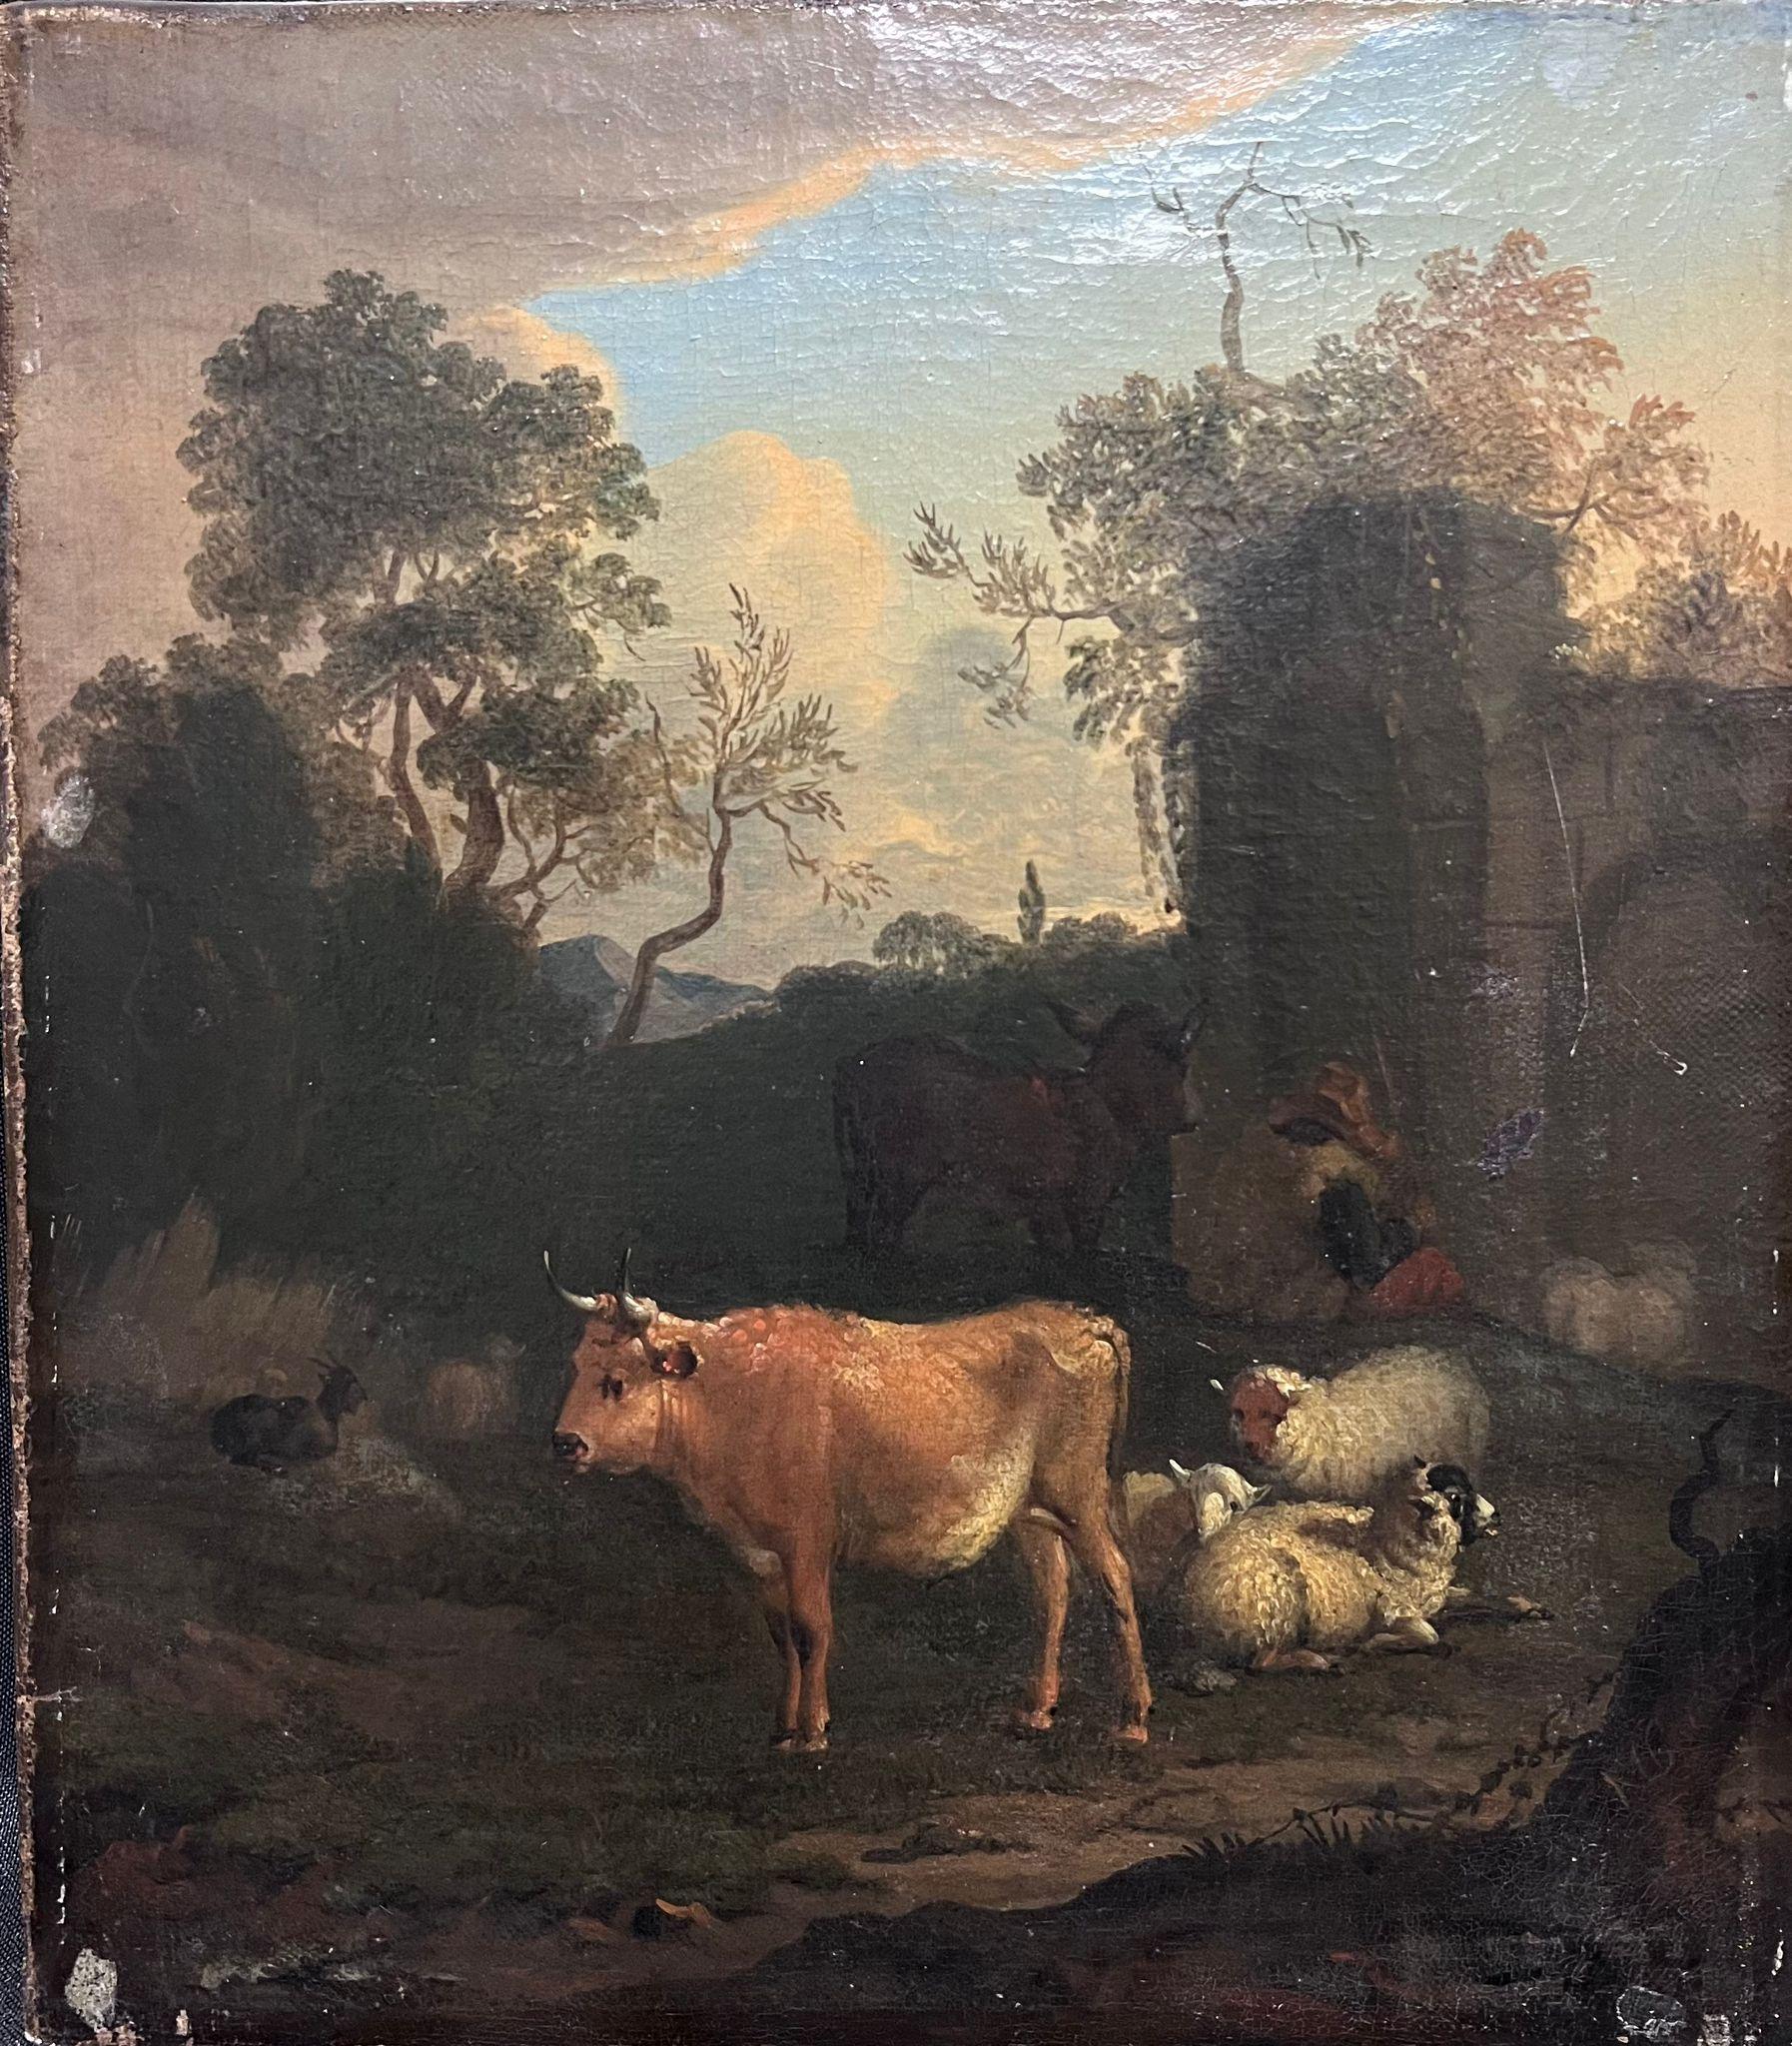 Pastoral Landscape
Dutch Old Master, 18th century
oil on canvas, unframed
canvas: 12 x 10 inches
provenance: private collection, UK
condition: good and sound condition with a few surface abrasions and marks. 